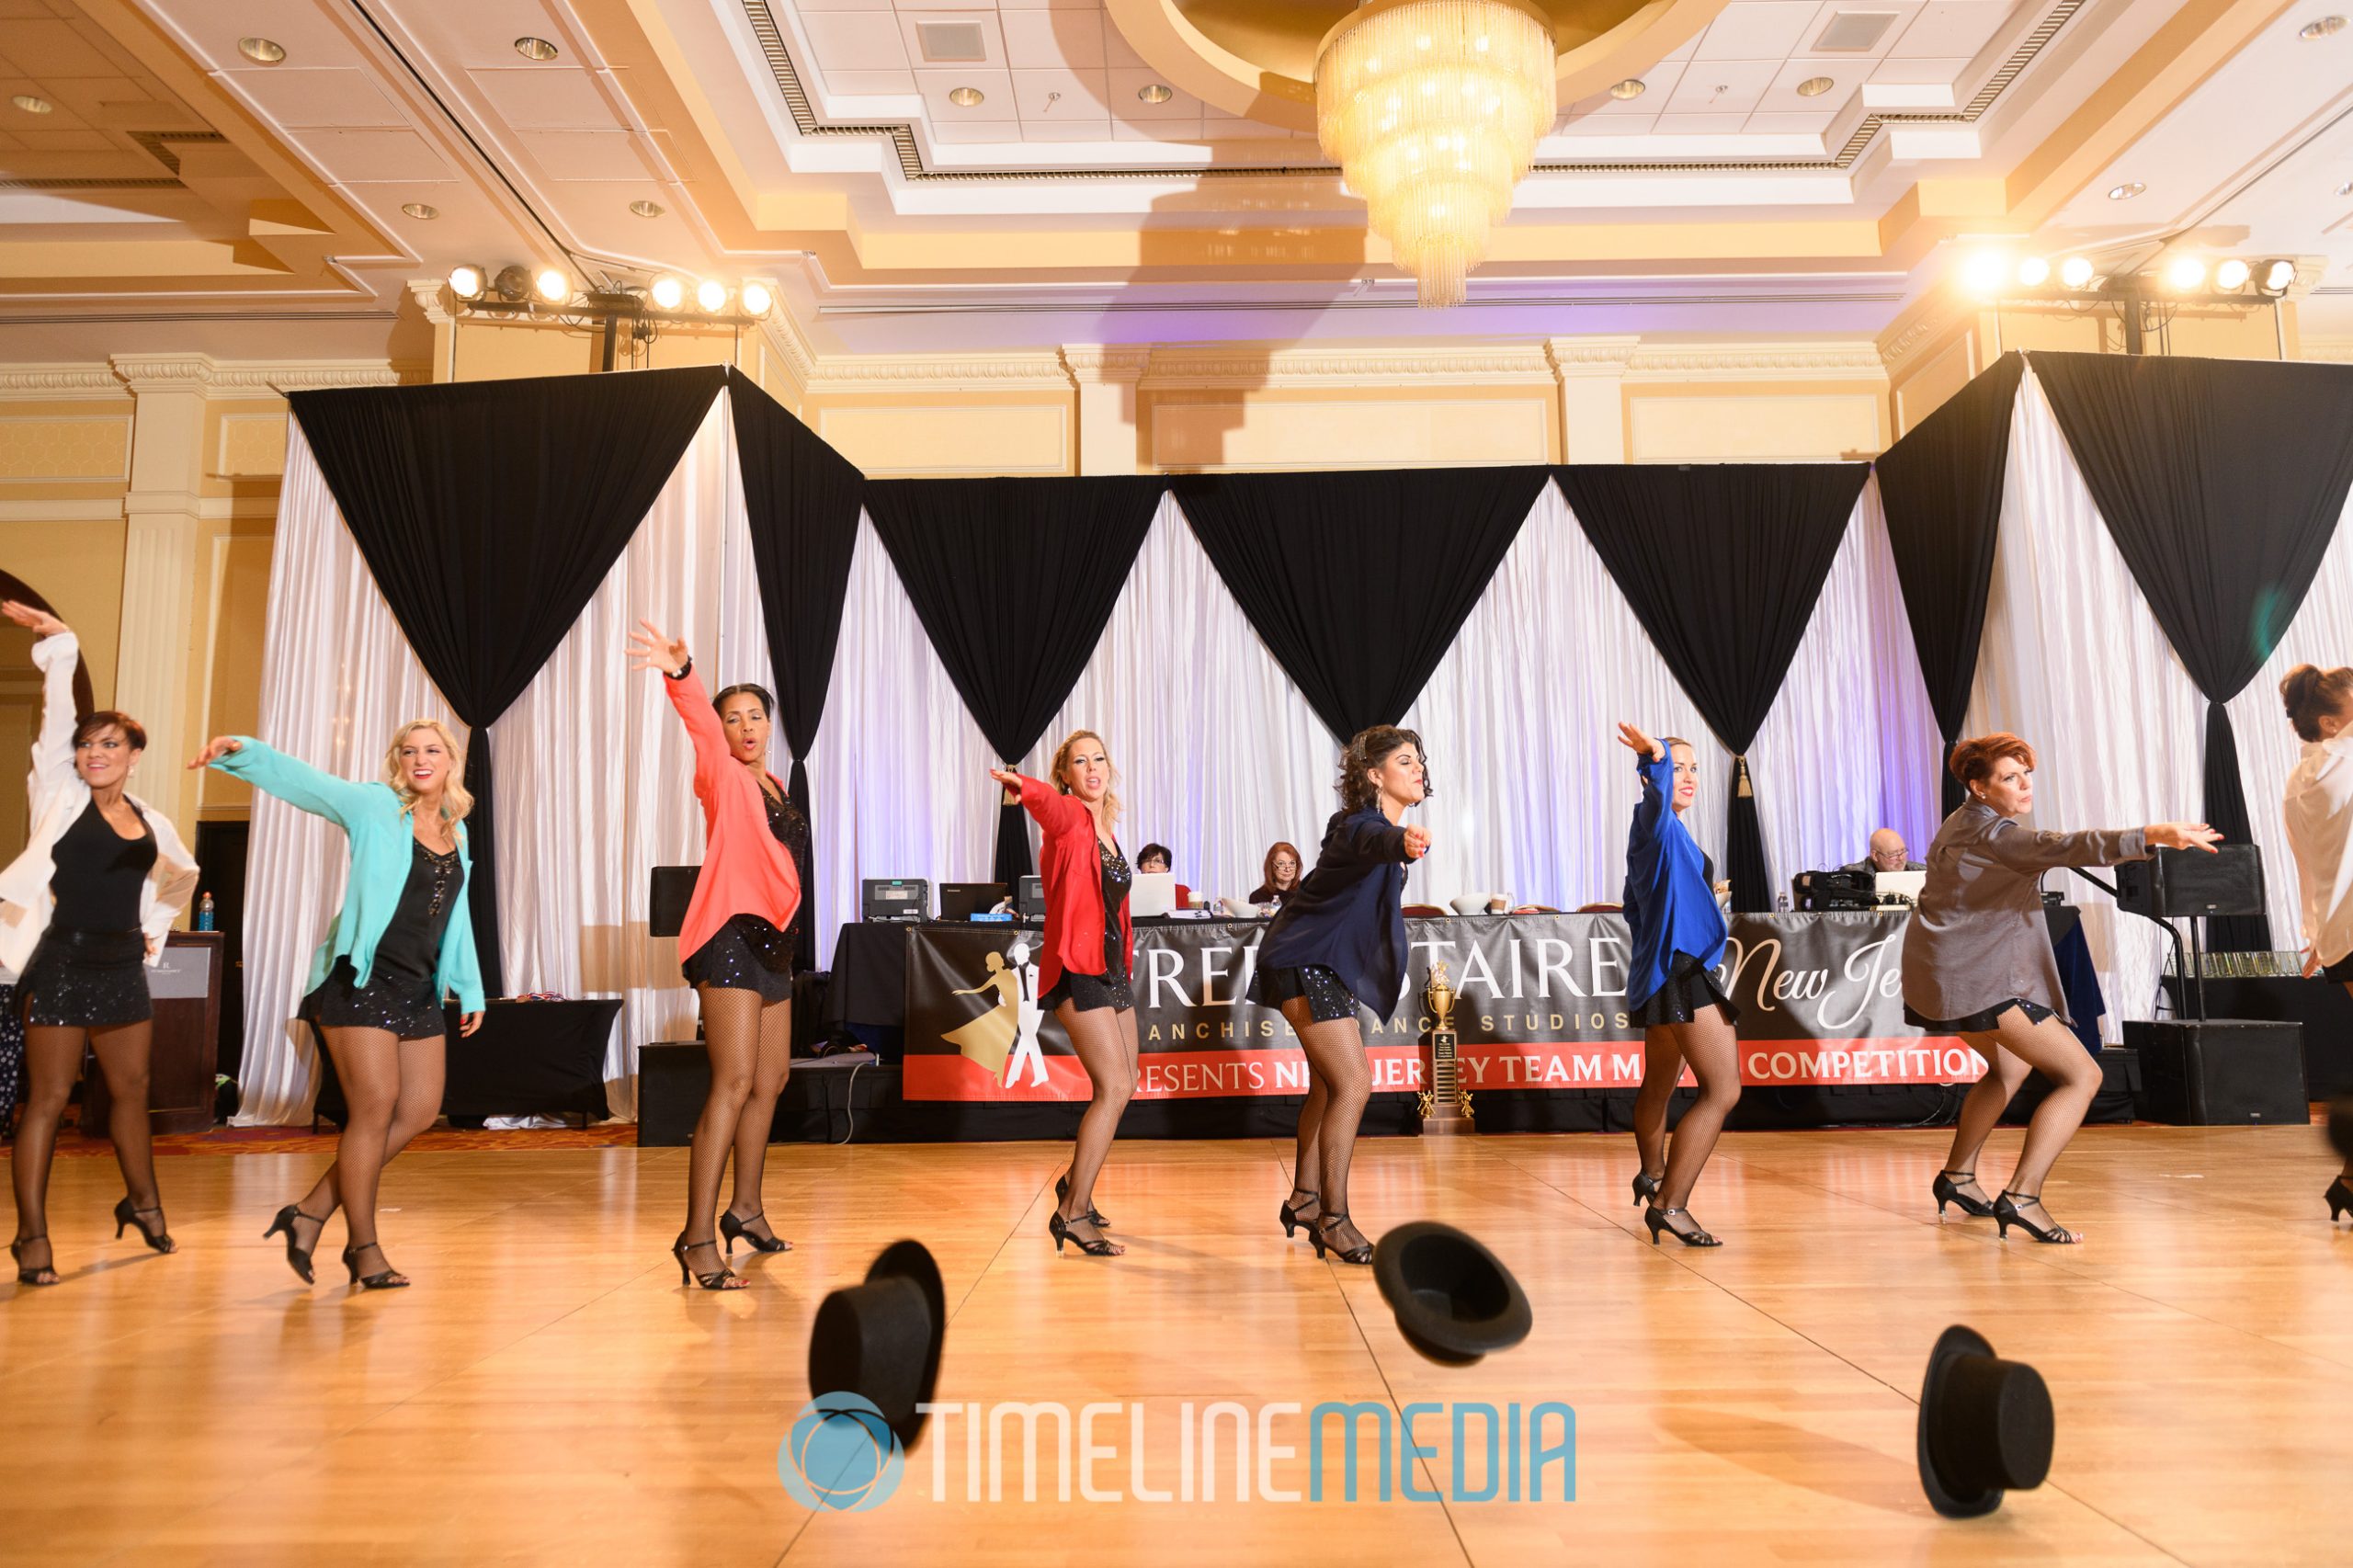 Dancers competing at the NJ Fred Astaire Team Match ©TimeLine Media